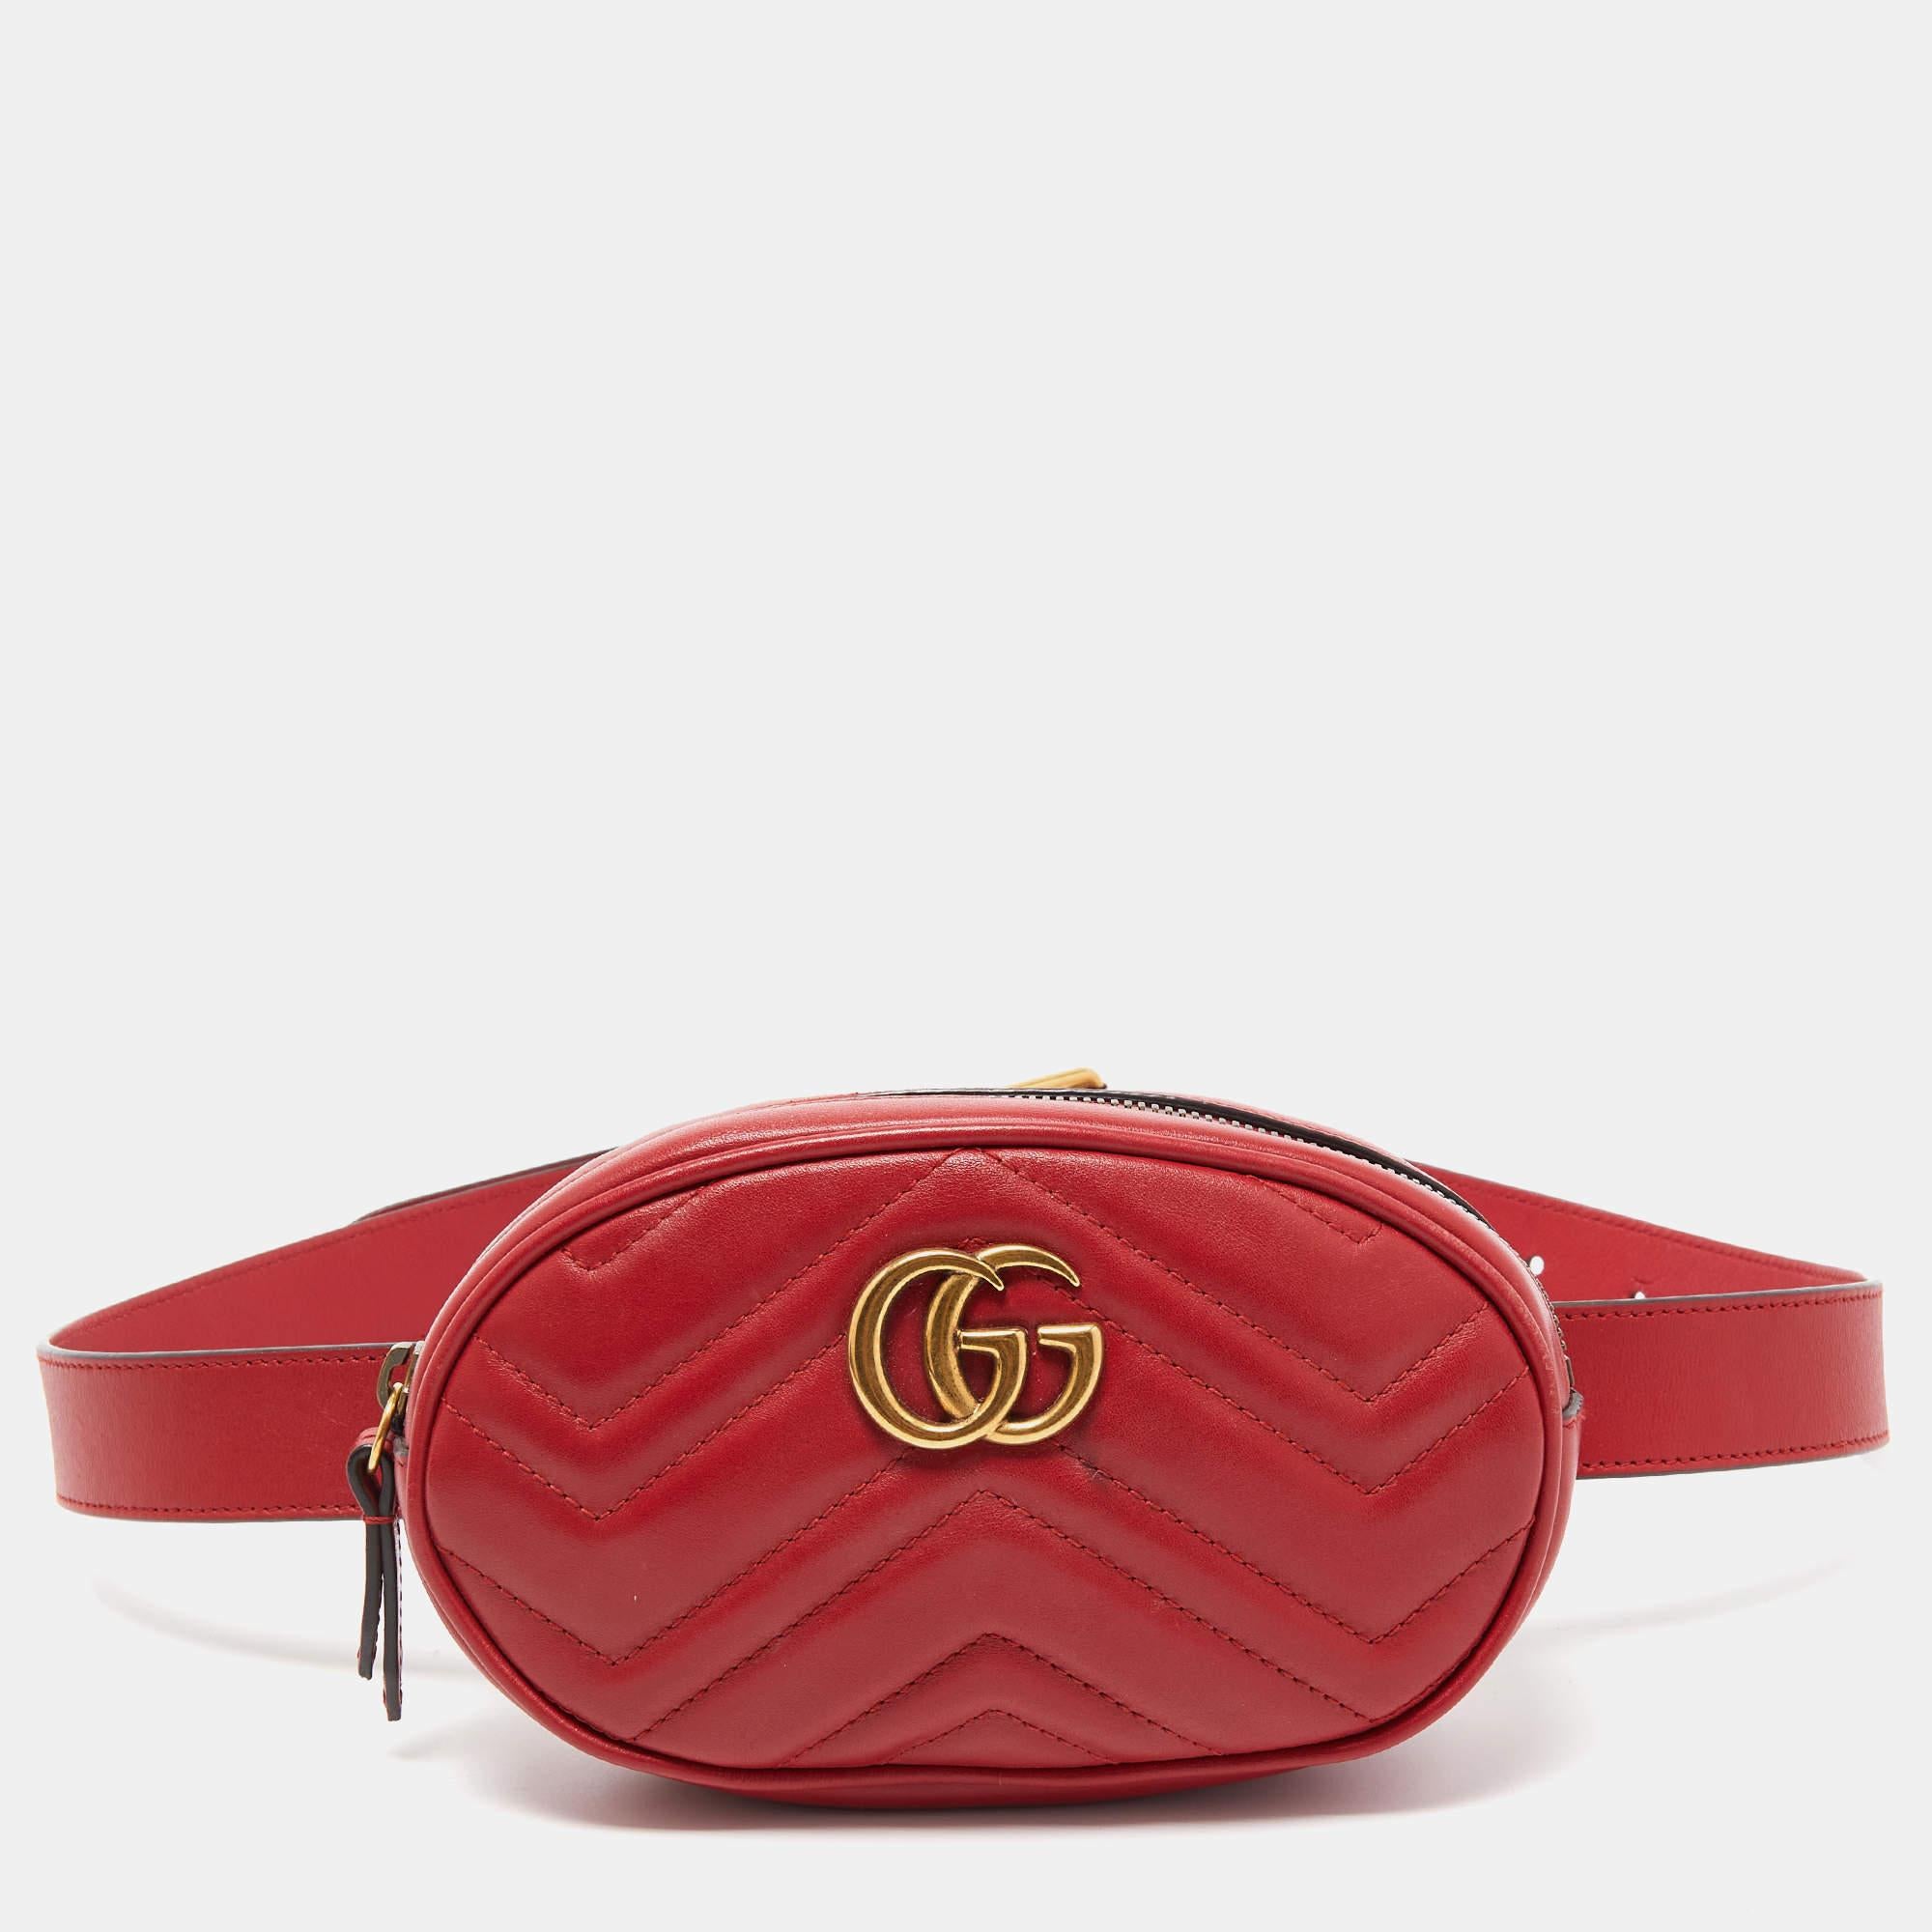 Innovative and sophisticated, this Gucci Marmont belt bag evokes a sense of classic glamour. Finely crafted from matelassé leather, it gets a luxe update with the double 'G' motif on the front and features a perfectly sized interior. The strap will